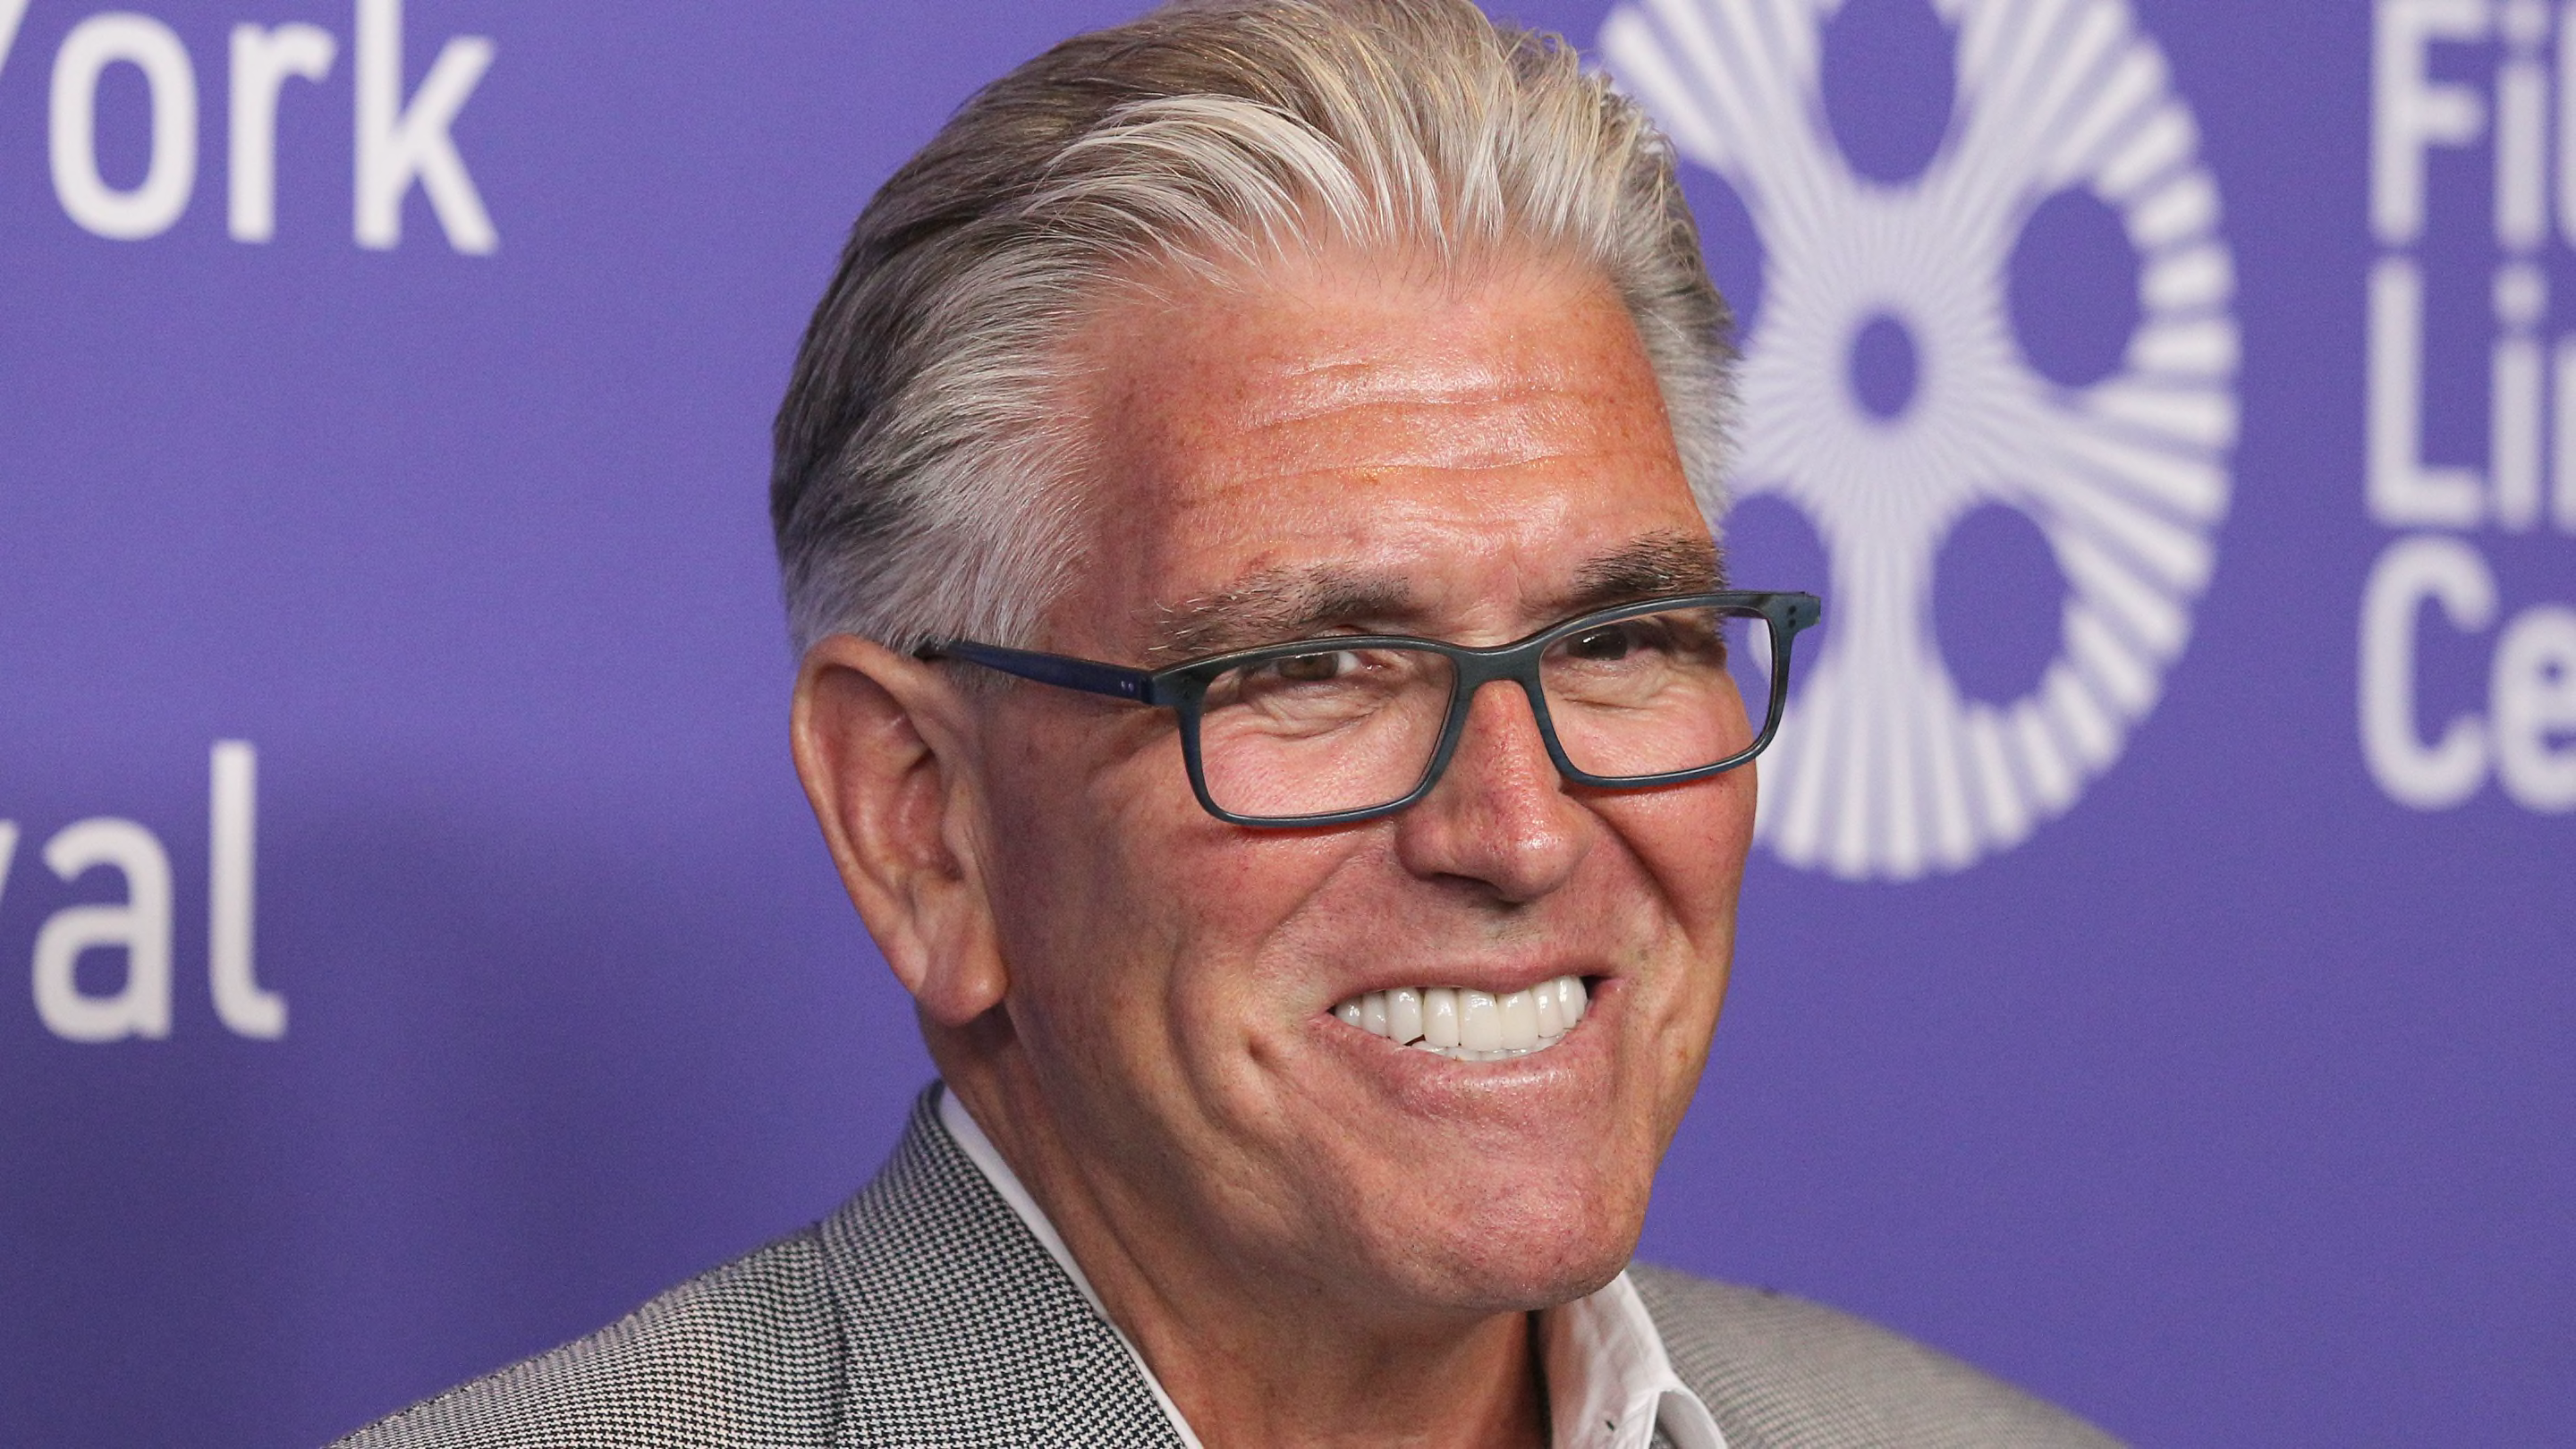 Mike Francesa Does Not Enjoy Eclipse, Science In General